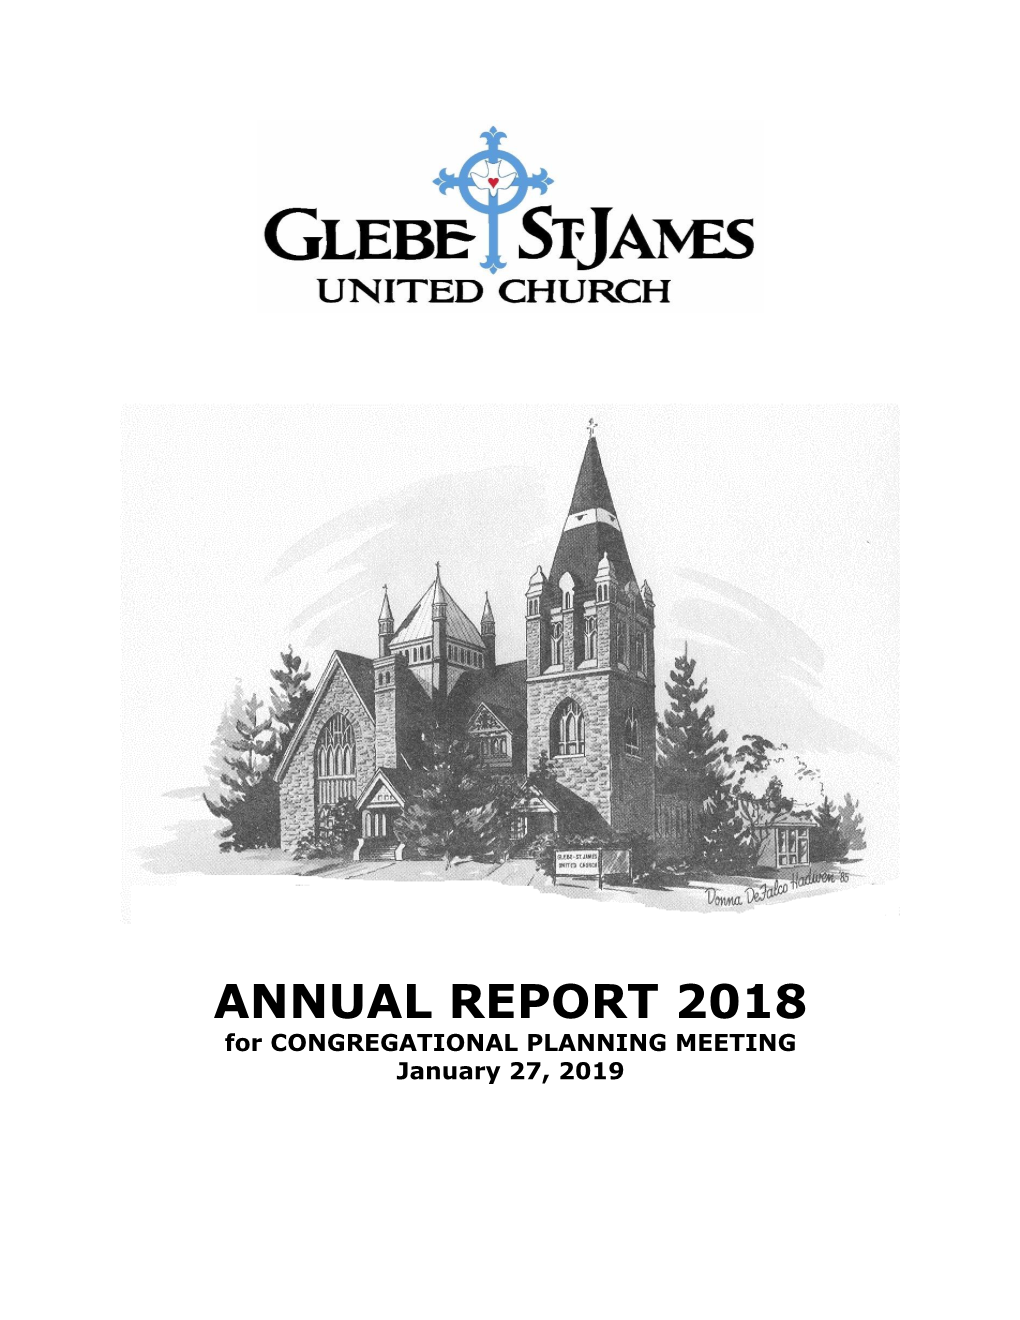 ANNUAL REPORT 2018 for CONGREGATIONAL PLANNING MEETING January 27, 2019